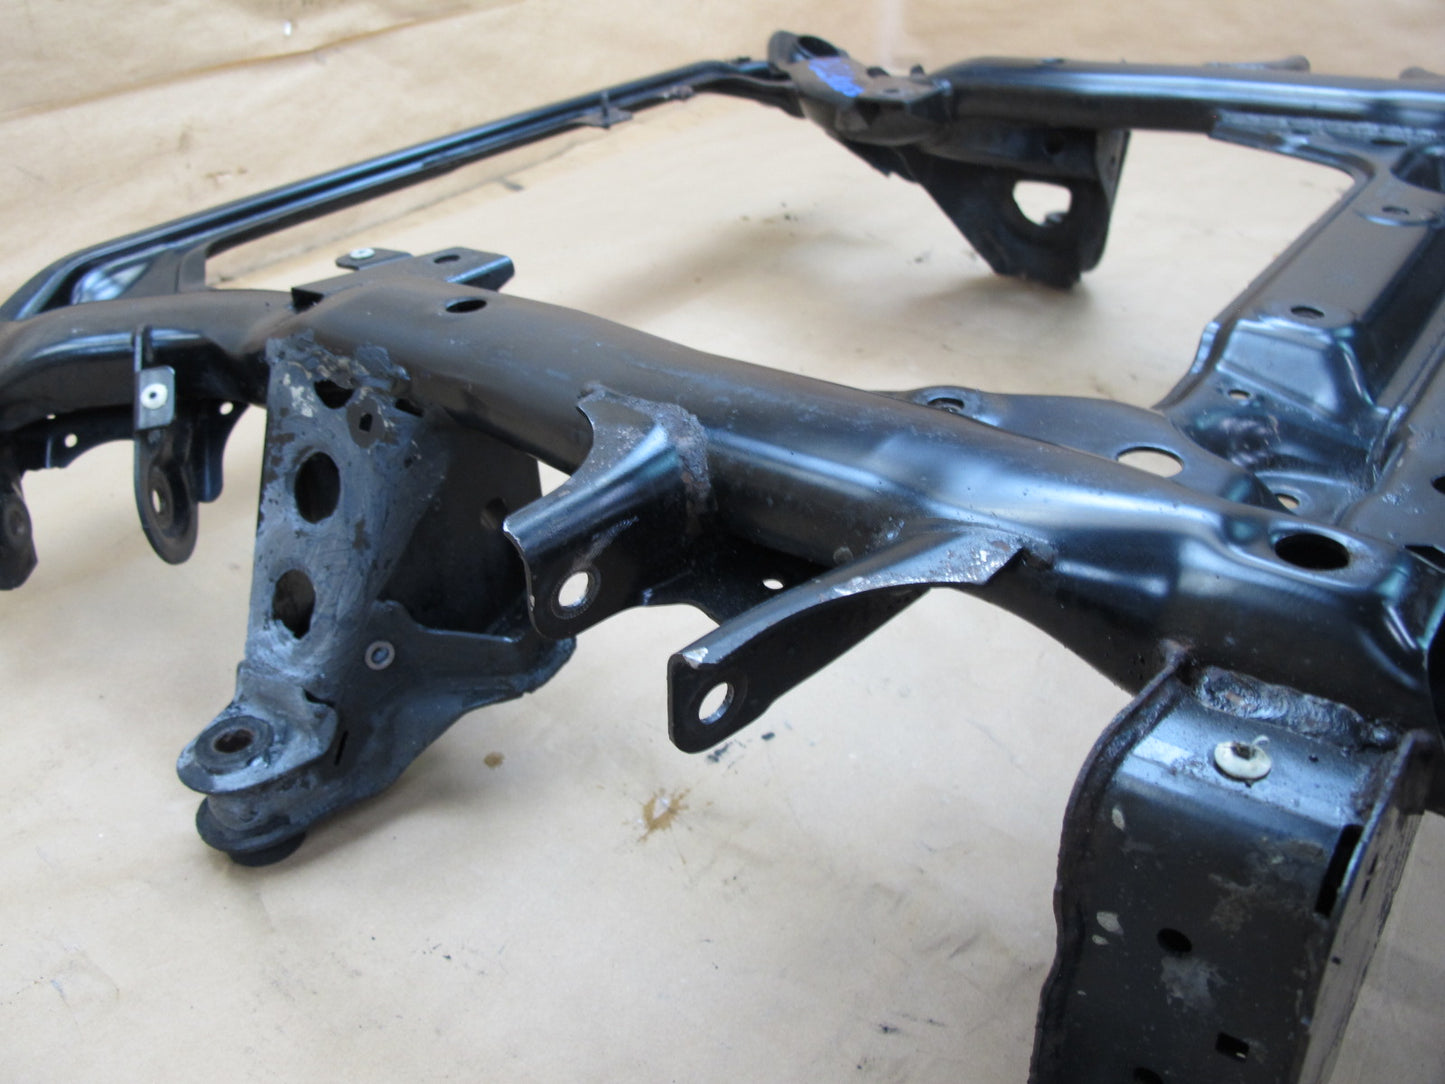 07-11 BMW E90 E91 E92 AWD Front Axle Support Crossmember Cradle 6776763 OEM